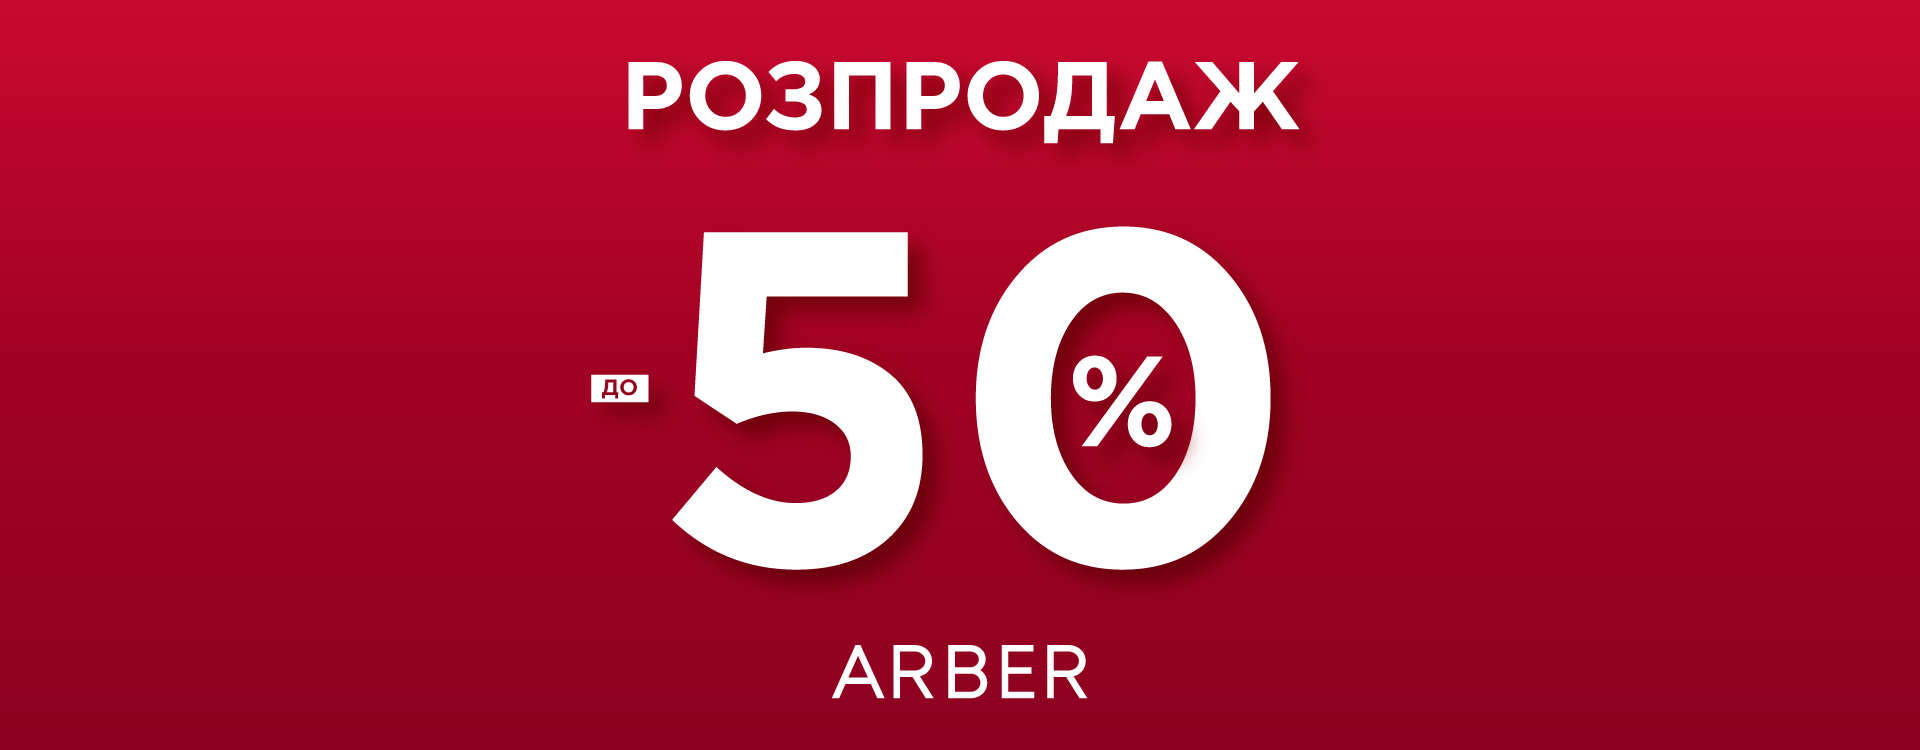 Holiday discounts up to 50% at Arber